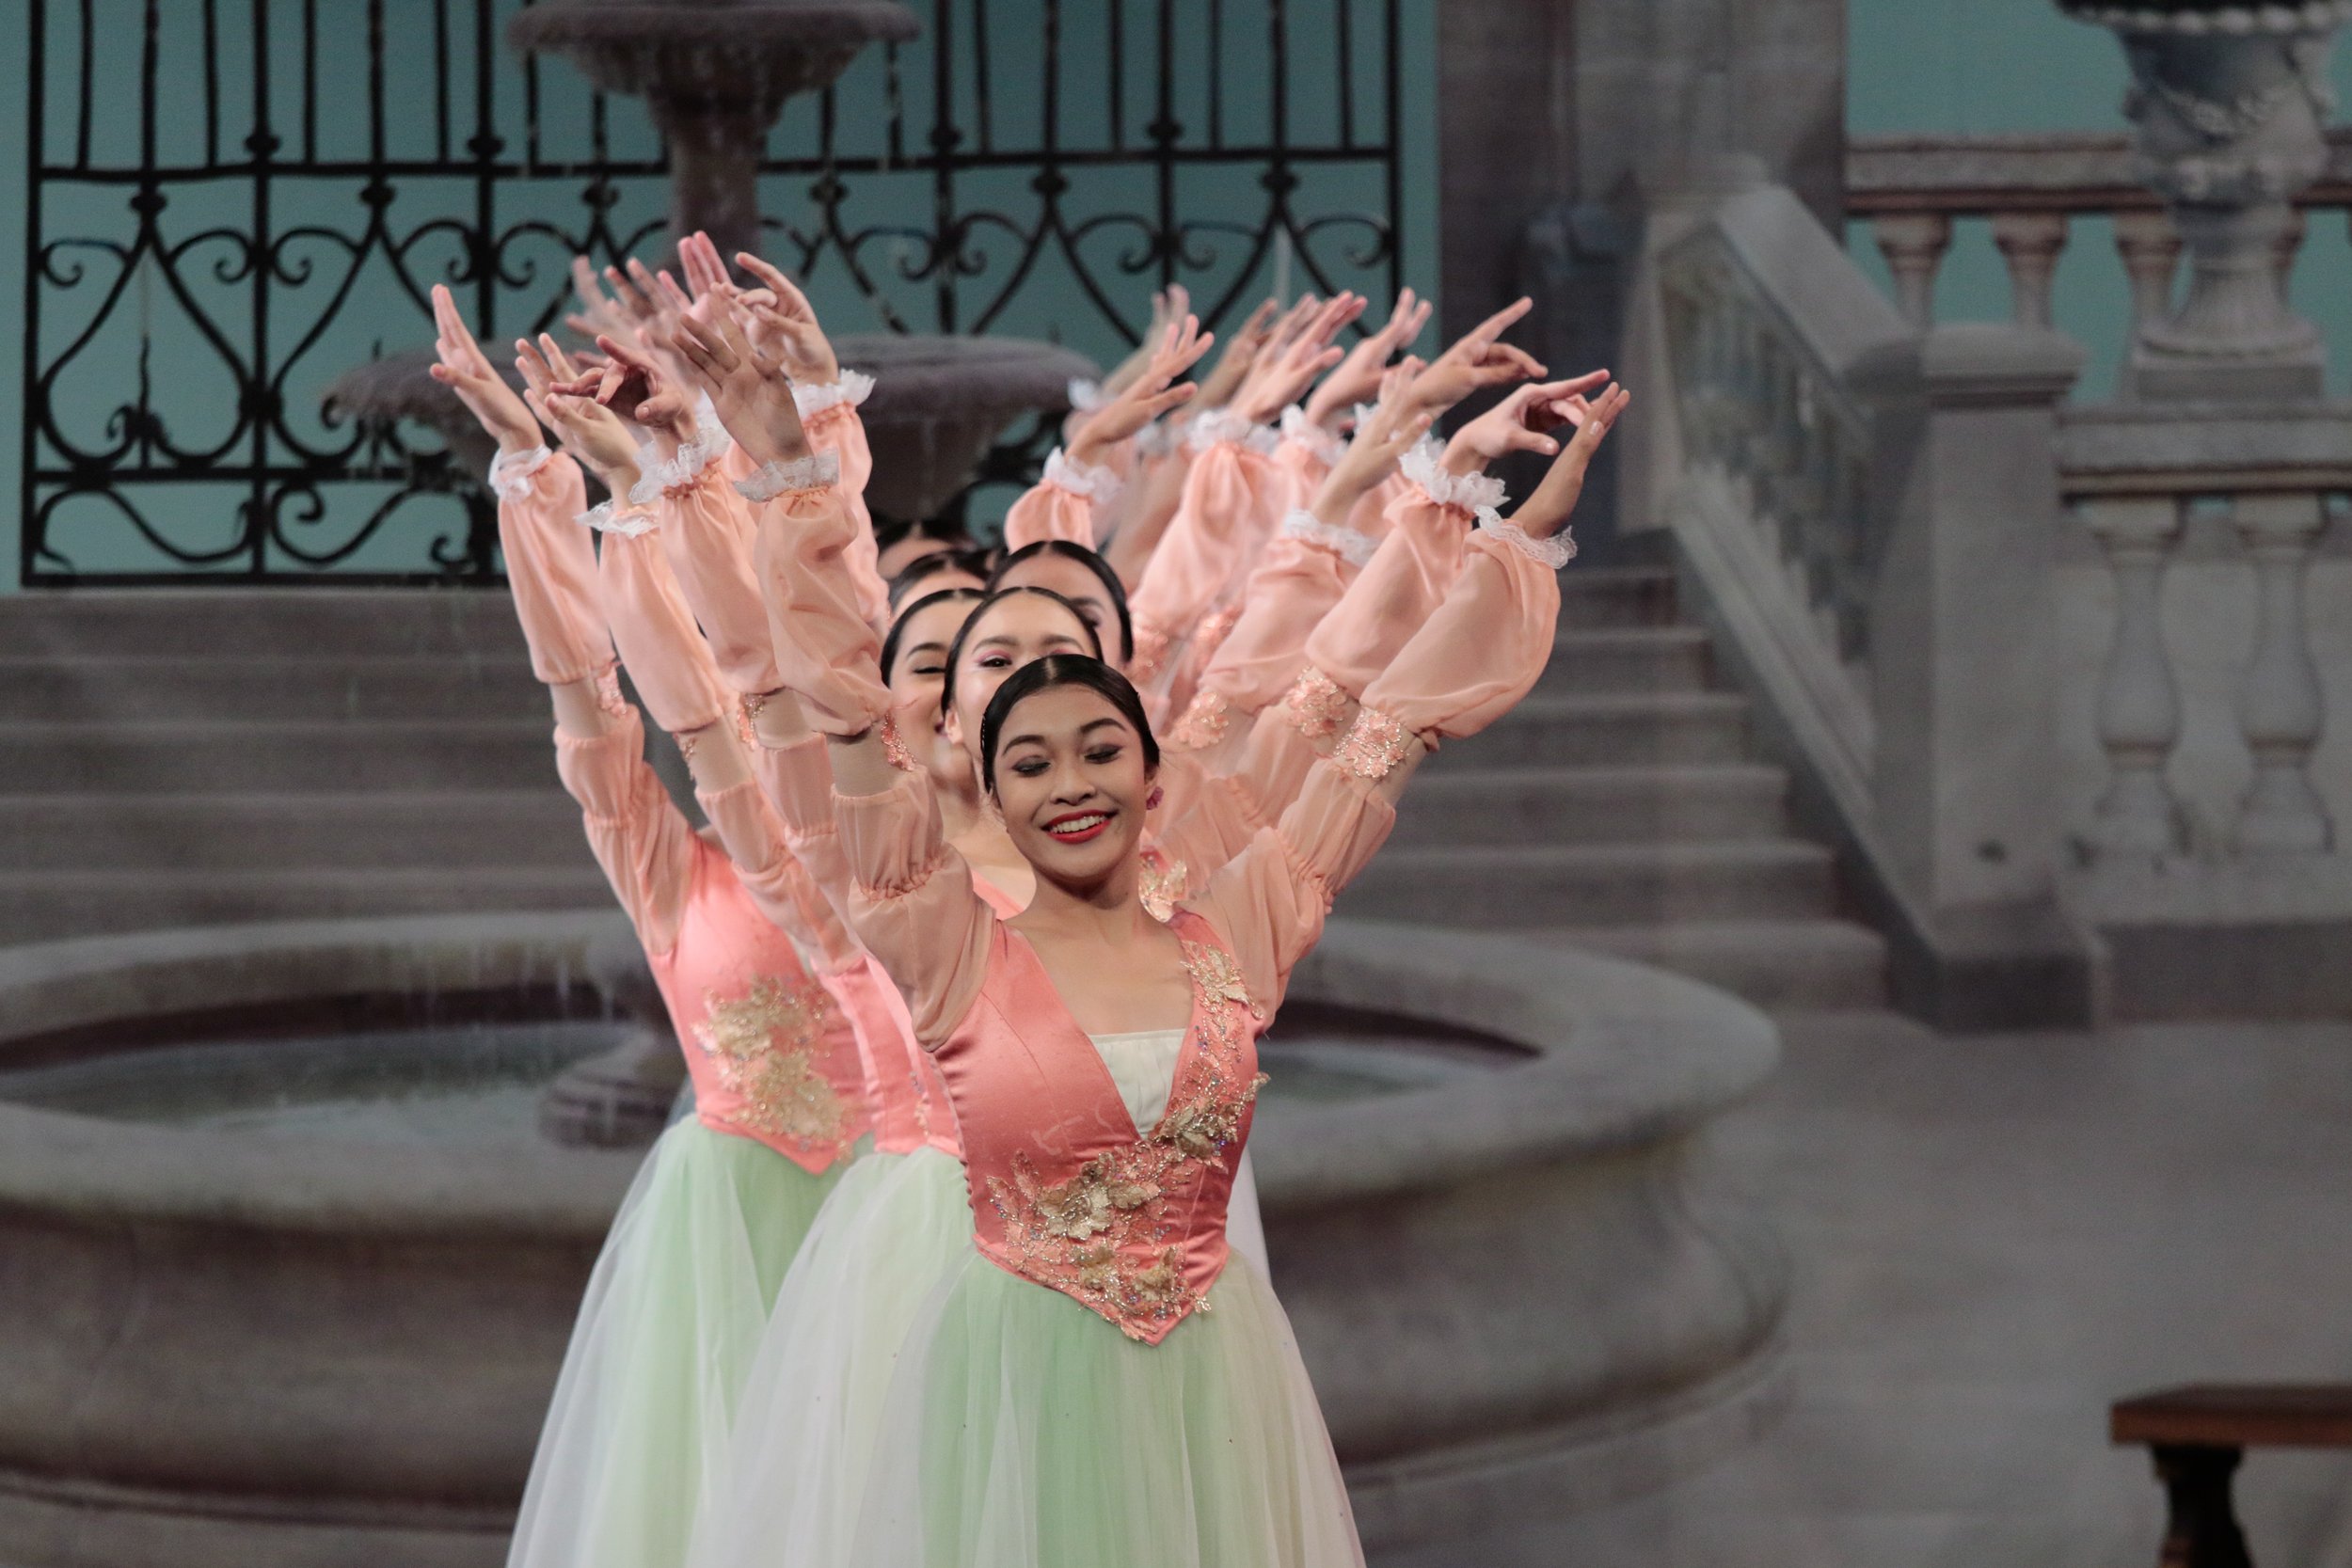    Dancing in the palace grounds in tutus of peach and mint green, these court ladies in  Swan Lake  (2017) savor performing at the coming-of-age celebration for Prince Siegfried. Photo by Ocs Alvarez   